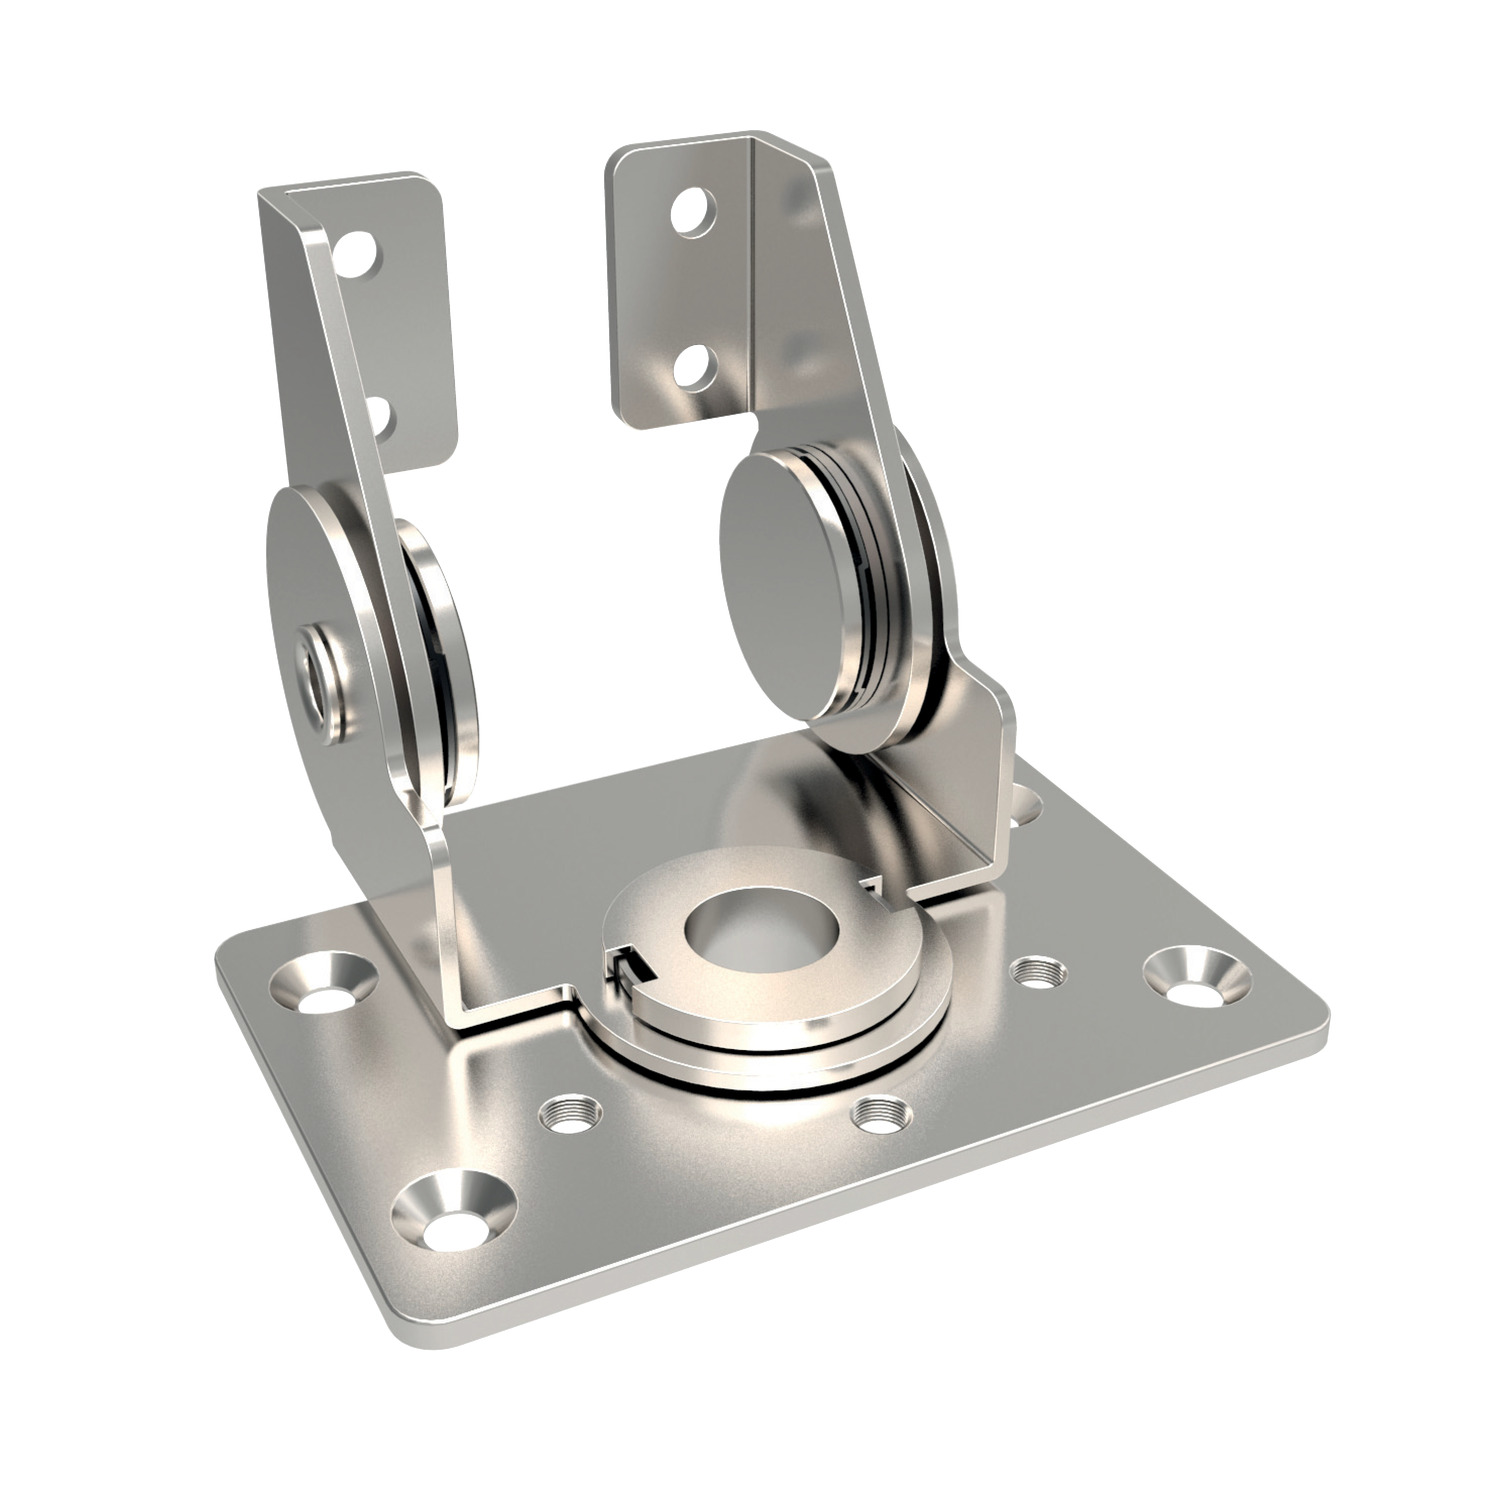 Constant Torque Hinge Dual axis constant torque friction hinges made from stainless steel (430). Stability is provided in both axes, ideal for mounting of monitors.